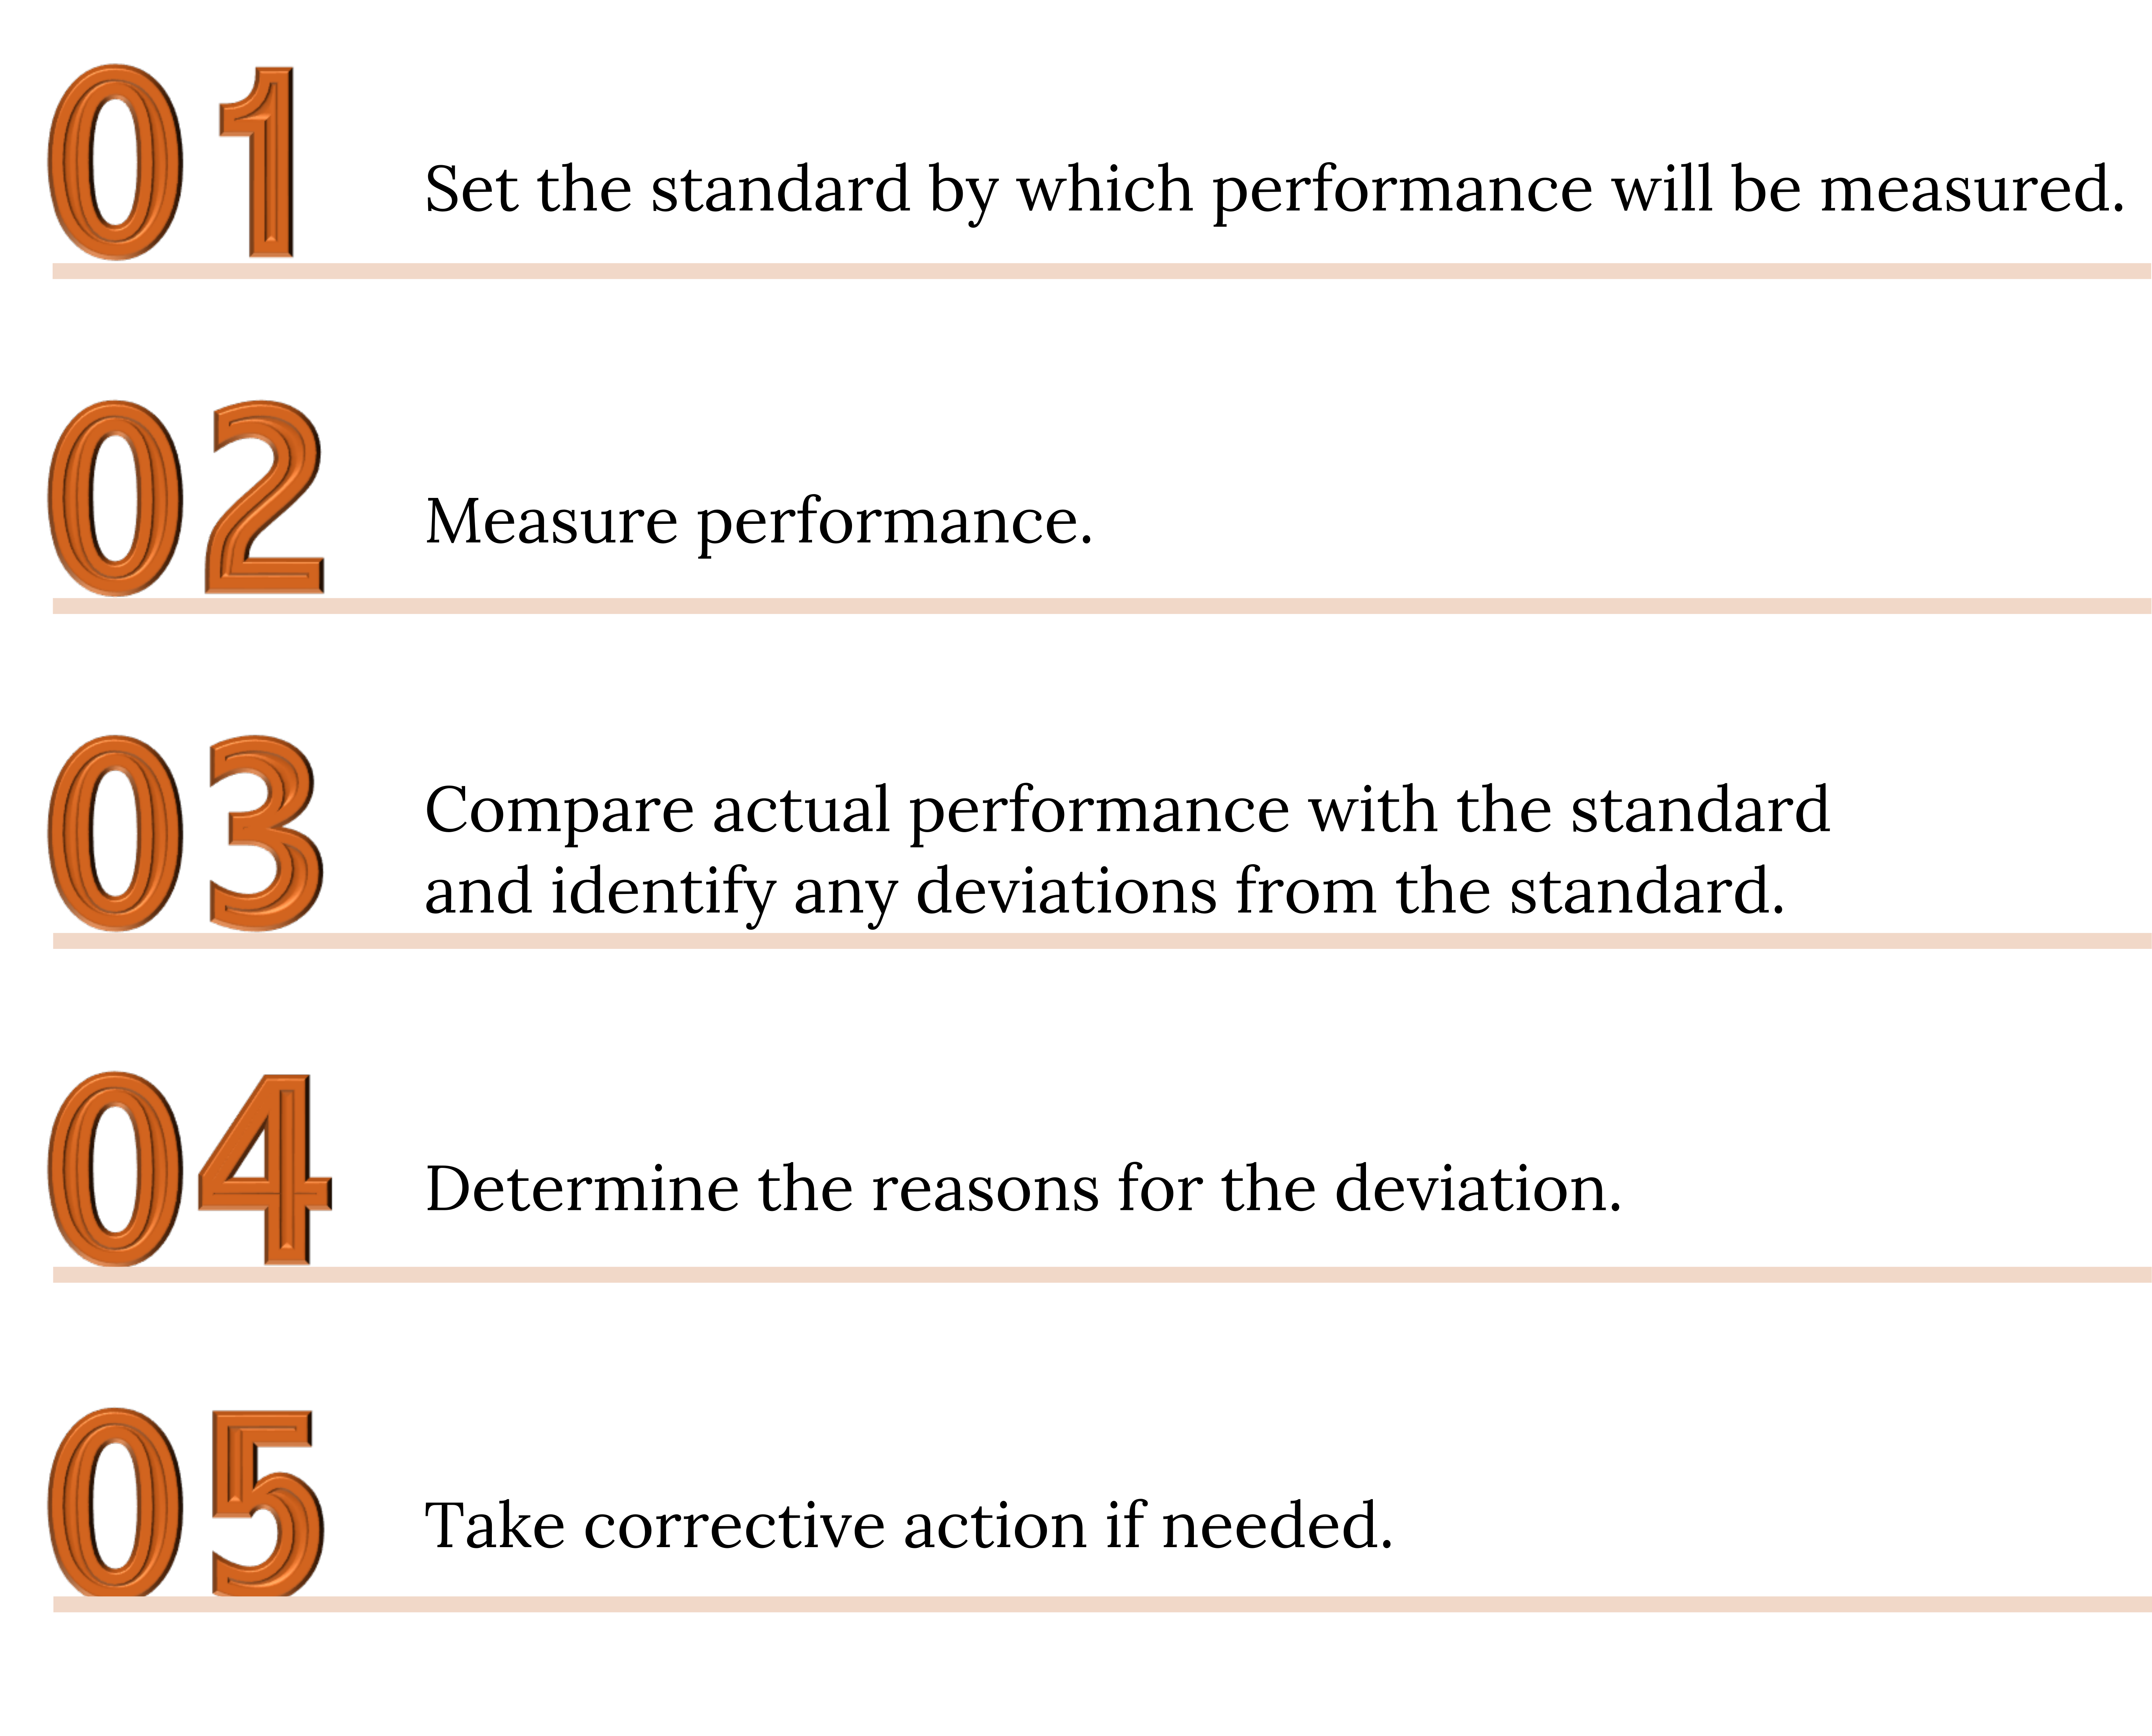 A list of the Control Process. From 1 to 5 the steps are: 1) Set the standard by which the performance will be measured. 2) Measure performance. 3) Compare actual performance with the standard and identify any deviations from the standard. 4) Determine the reasons for the deviation. 5) Take corrective action if needed.